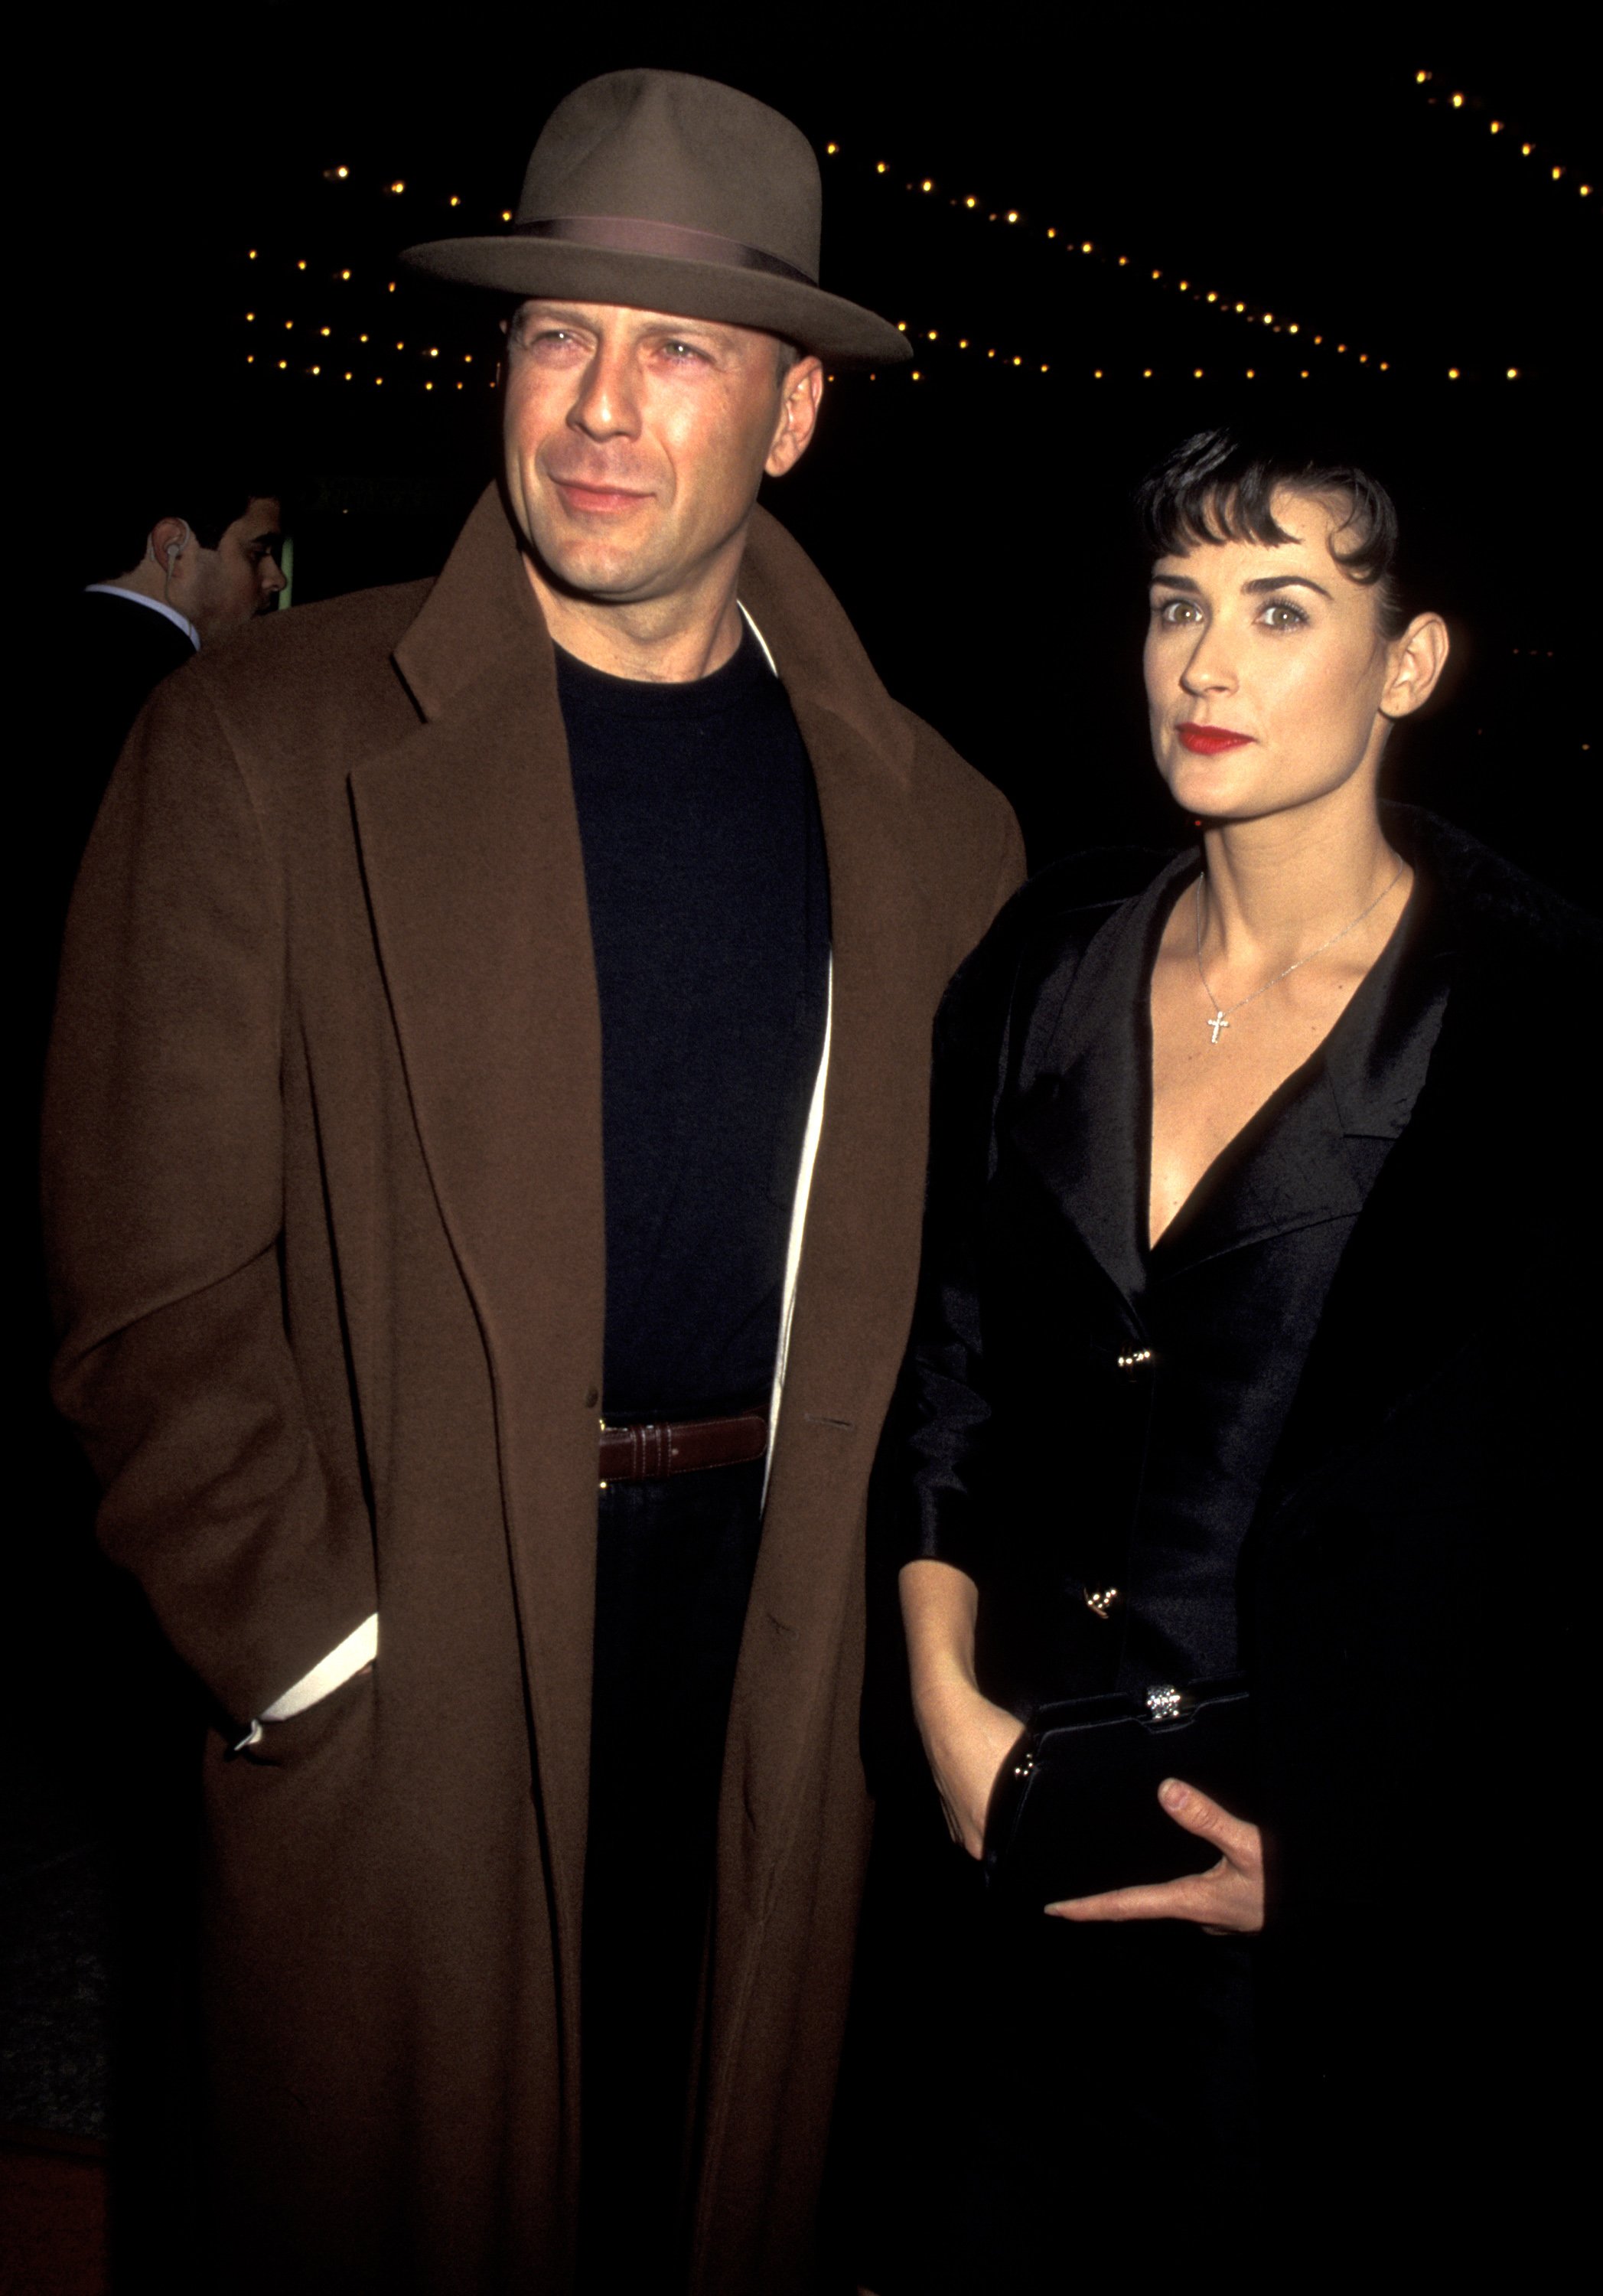 Bruce Willis and Demi Moore during "The Juror" Los Angeles premiere. | Source: Getty Images